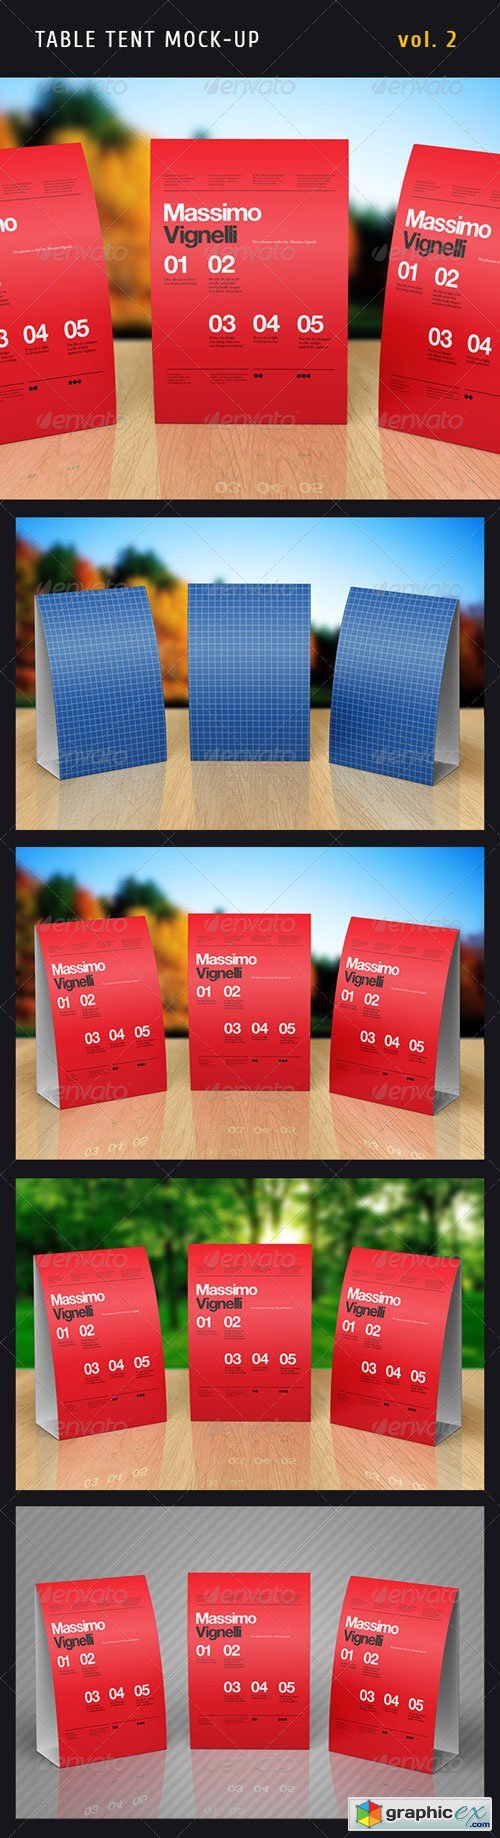 Paper Table Tent Mock-up Template Vol.2 (Promotion)